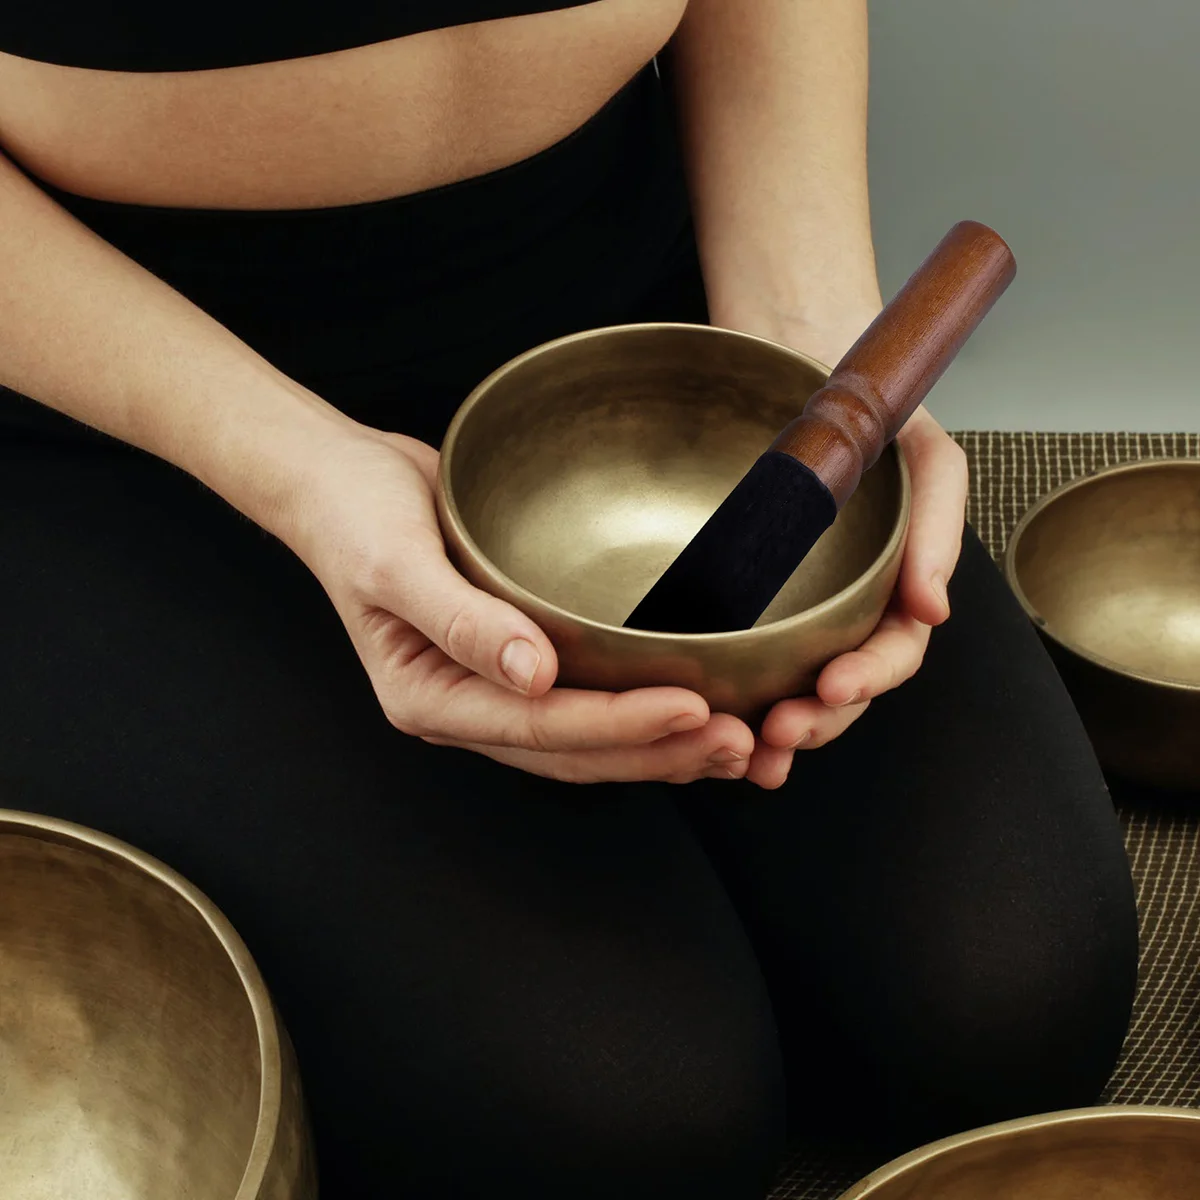 

Bowl Stick Singing Sound Mallet Meditation Tibetan Bowls Nepalese Striker Chanting Wrapped Made Hand Wood Yoga Relaxation